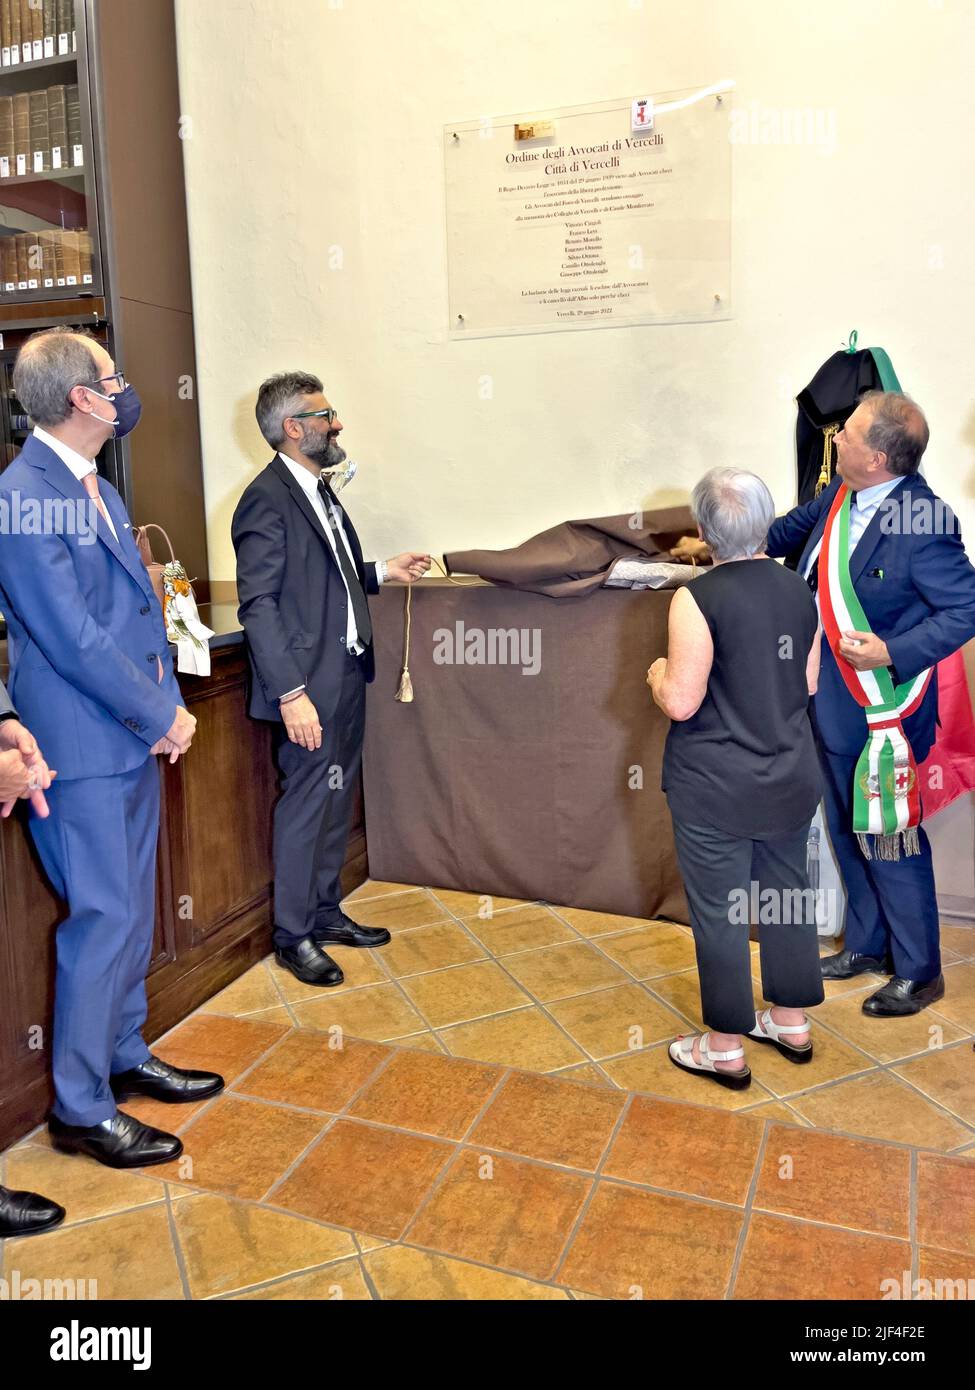 The unveiling of the plaque in memory of the Jewish lawyers excluded from the Italian racial laws of 1938-1939 Stock Photo